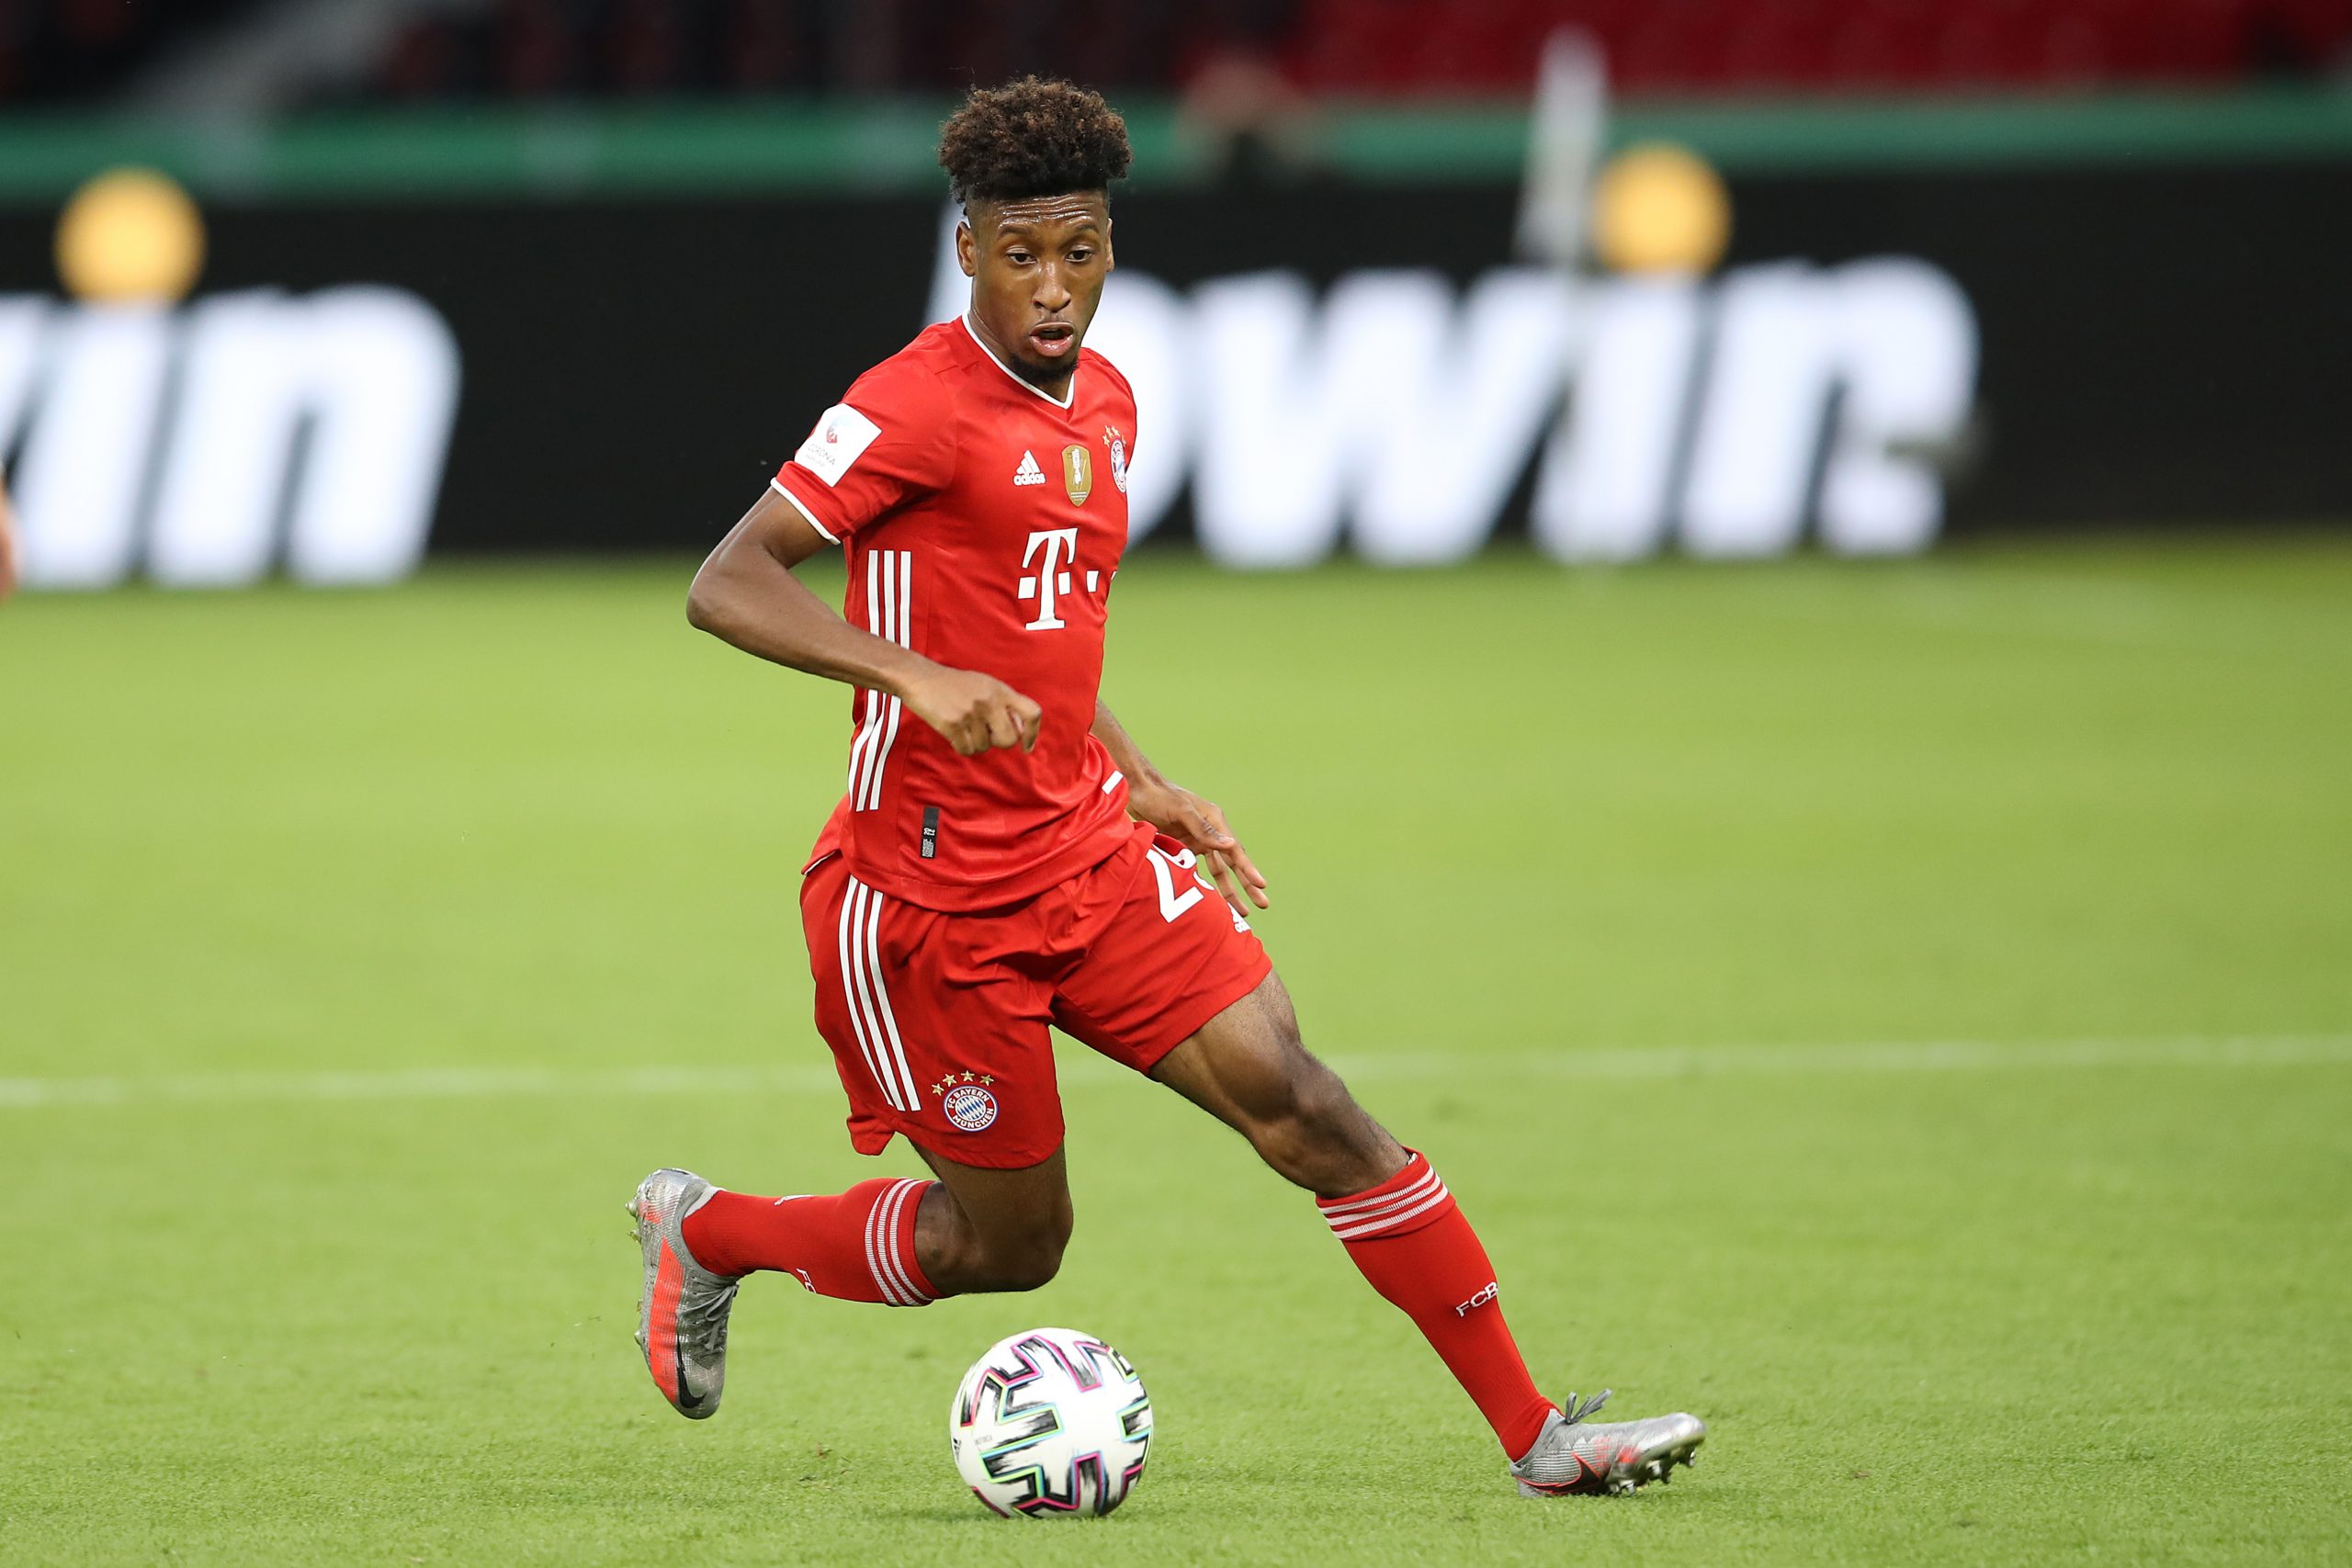 Coman provides update on his future amid Man United interest (Coman is in action in the picture)